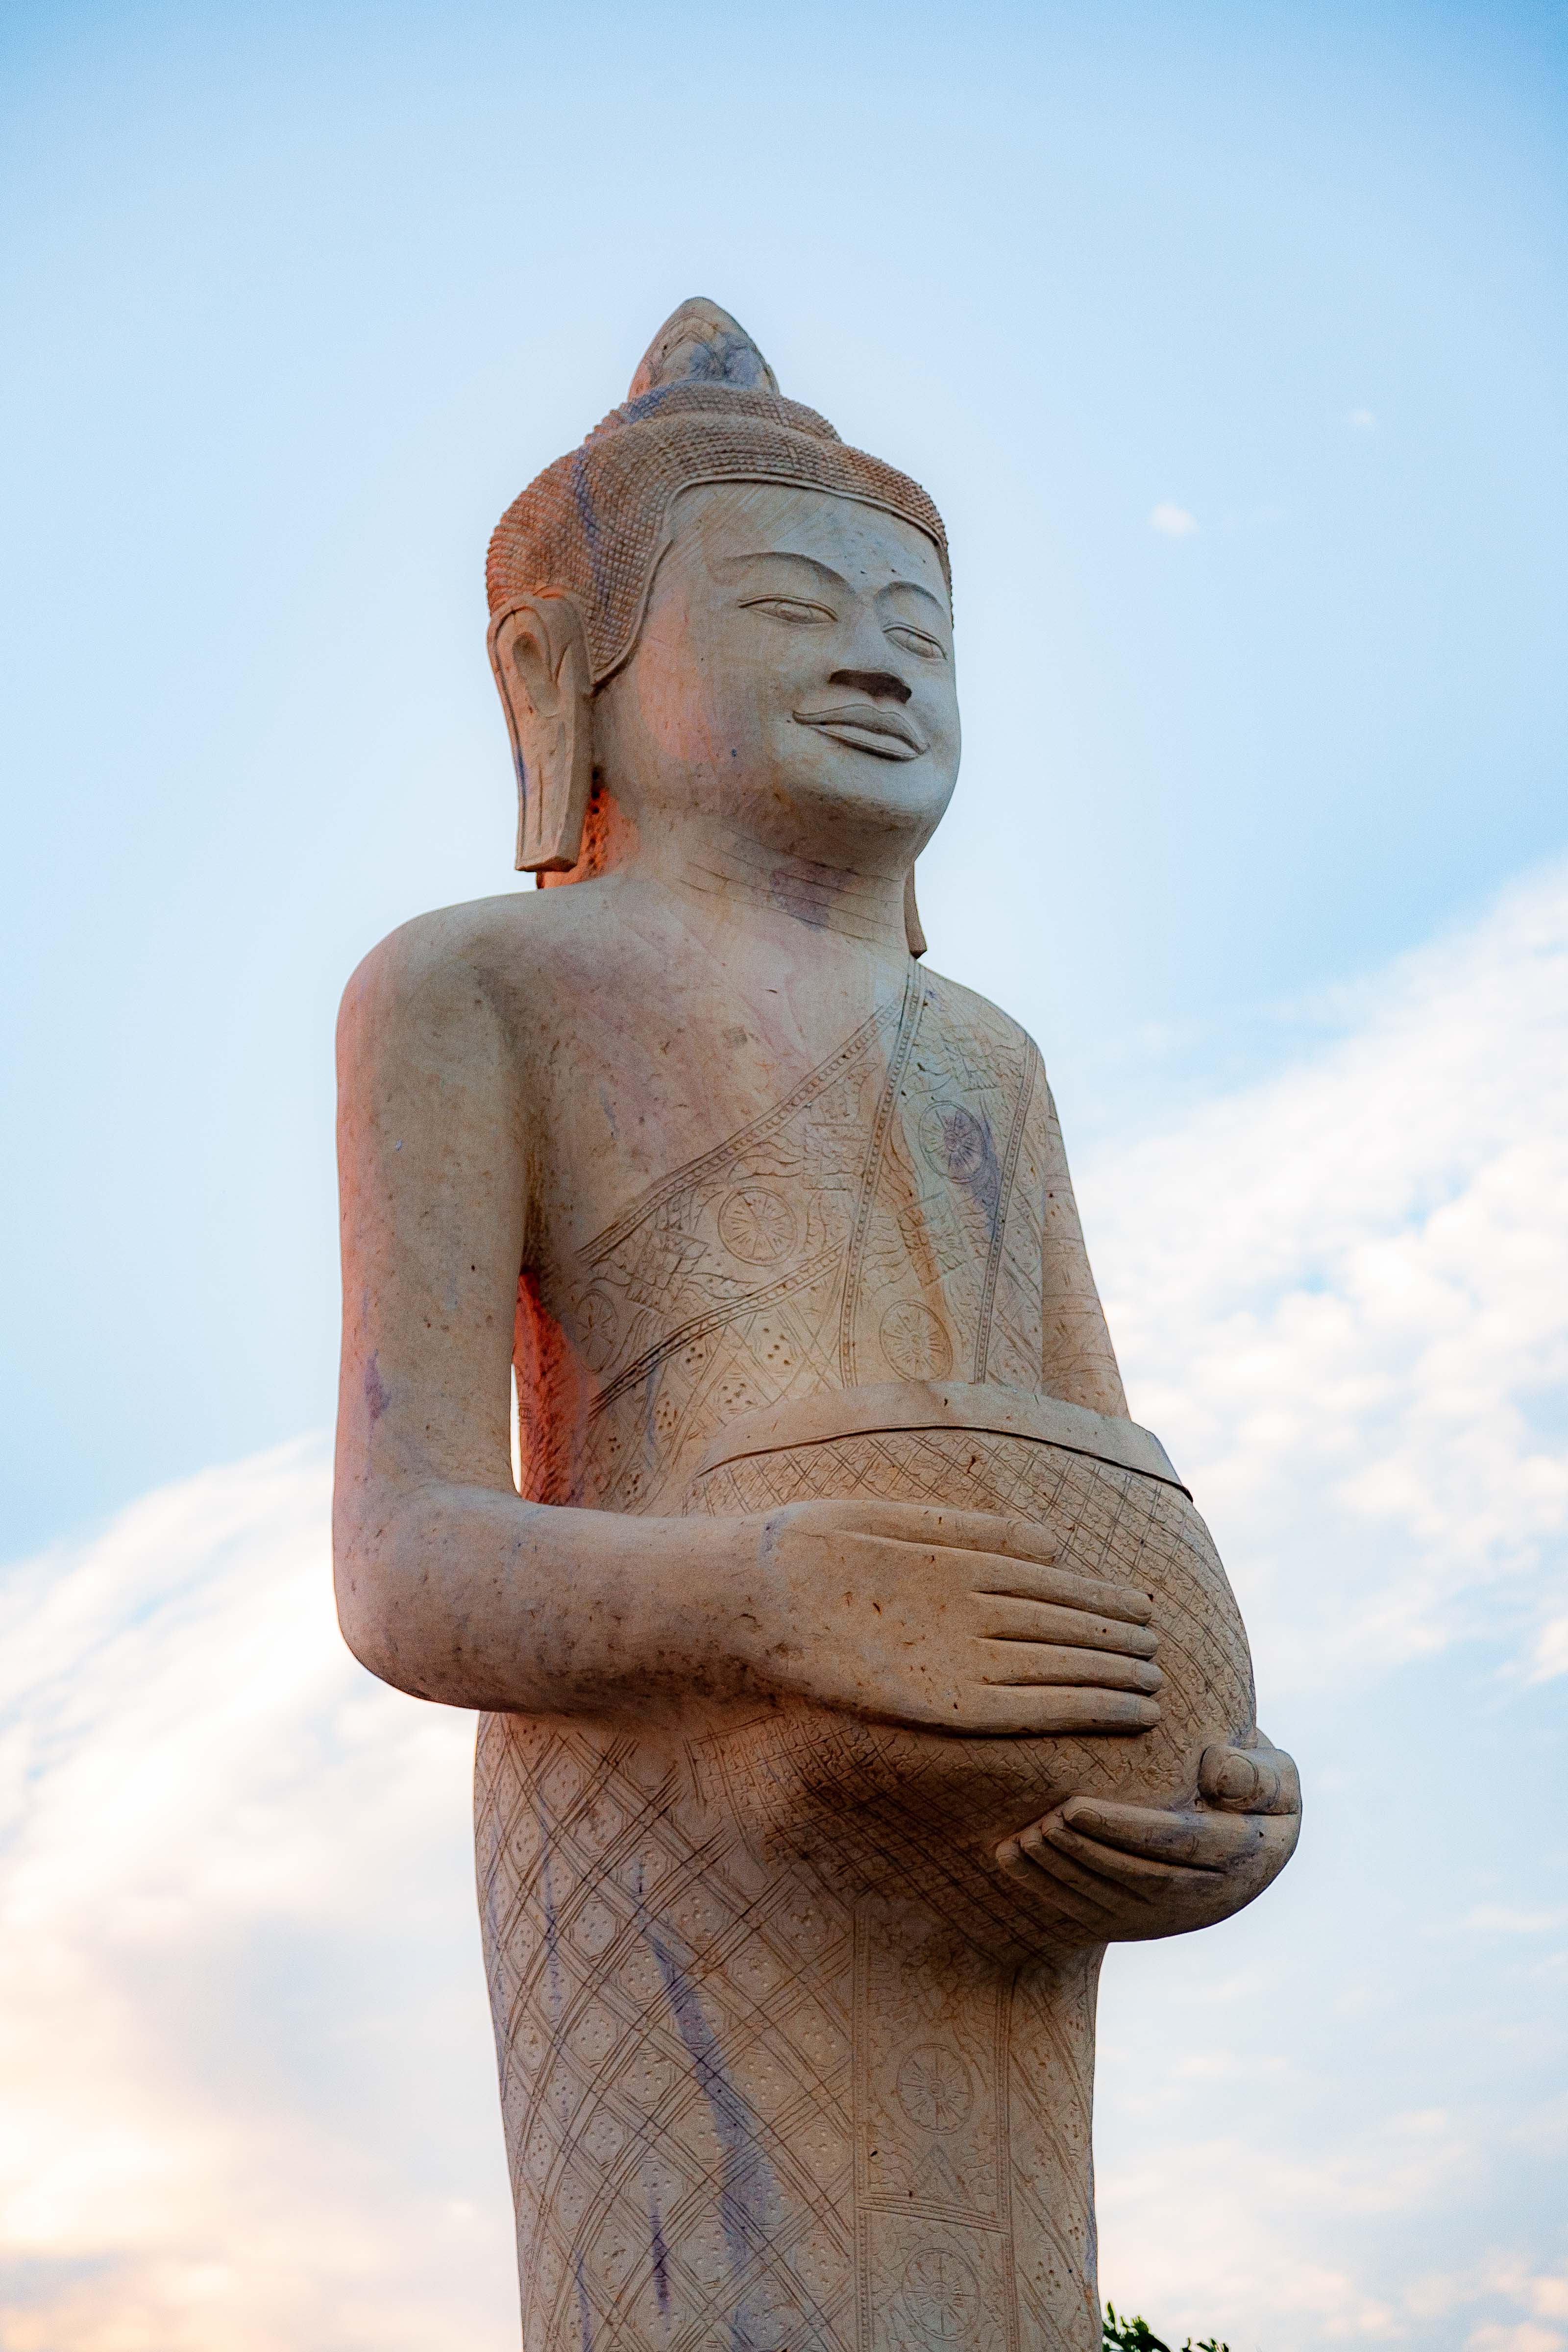 Cambodia, Kaoh Kong Prov, Country Statue, 2010, IMG 5086